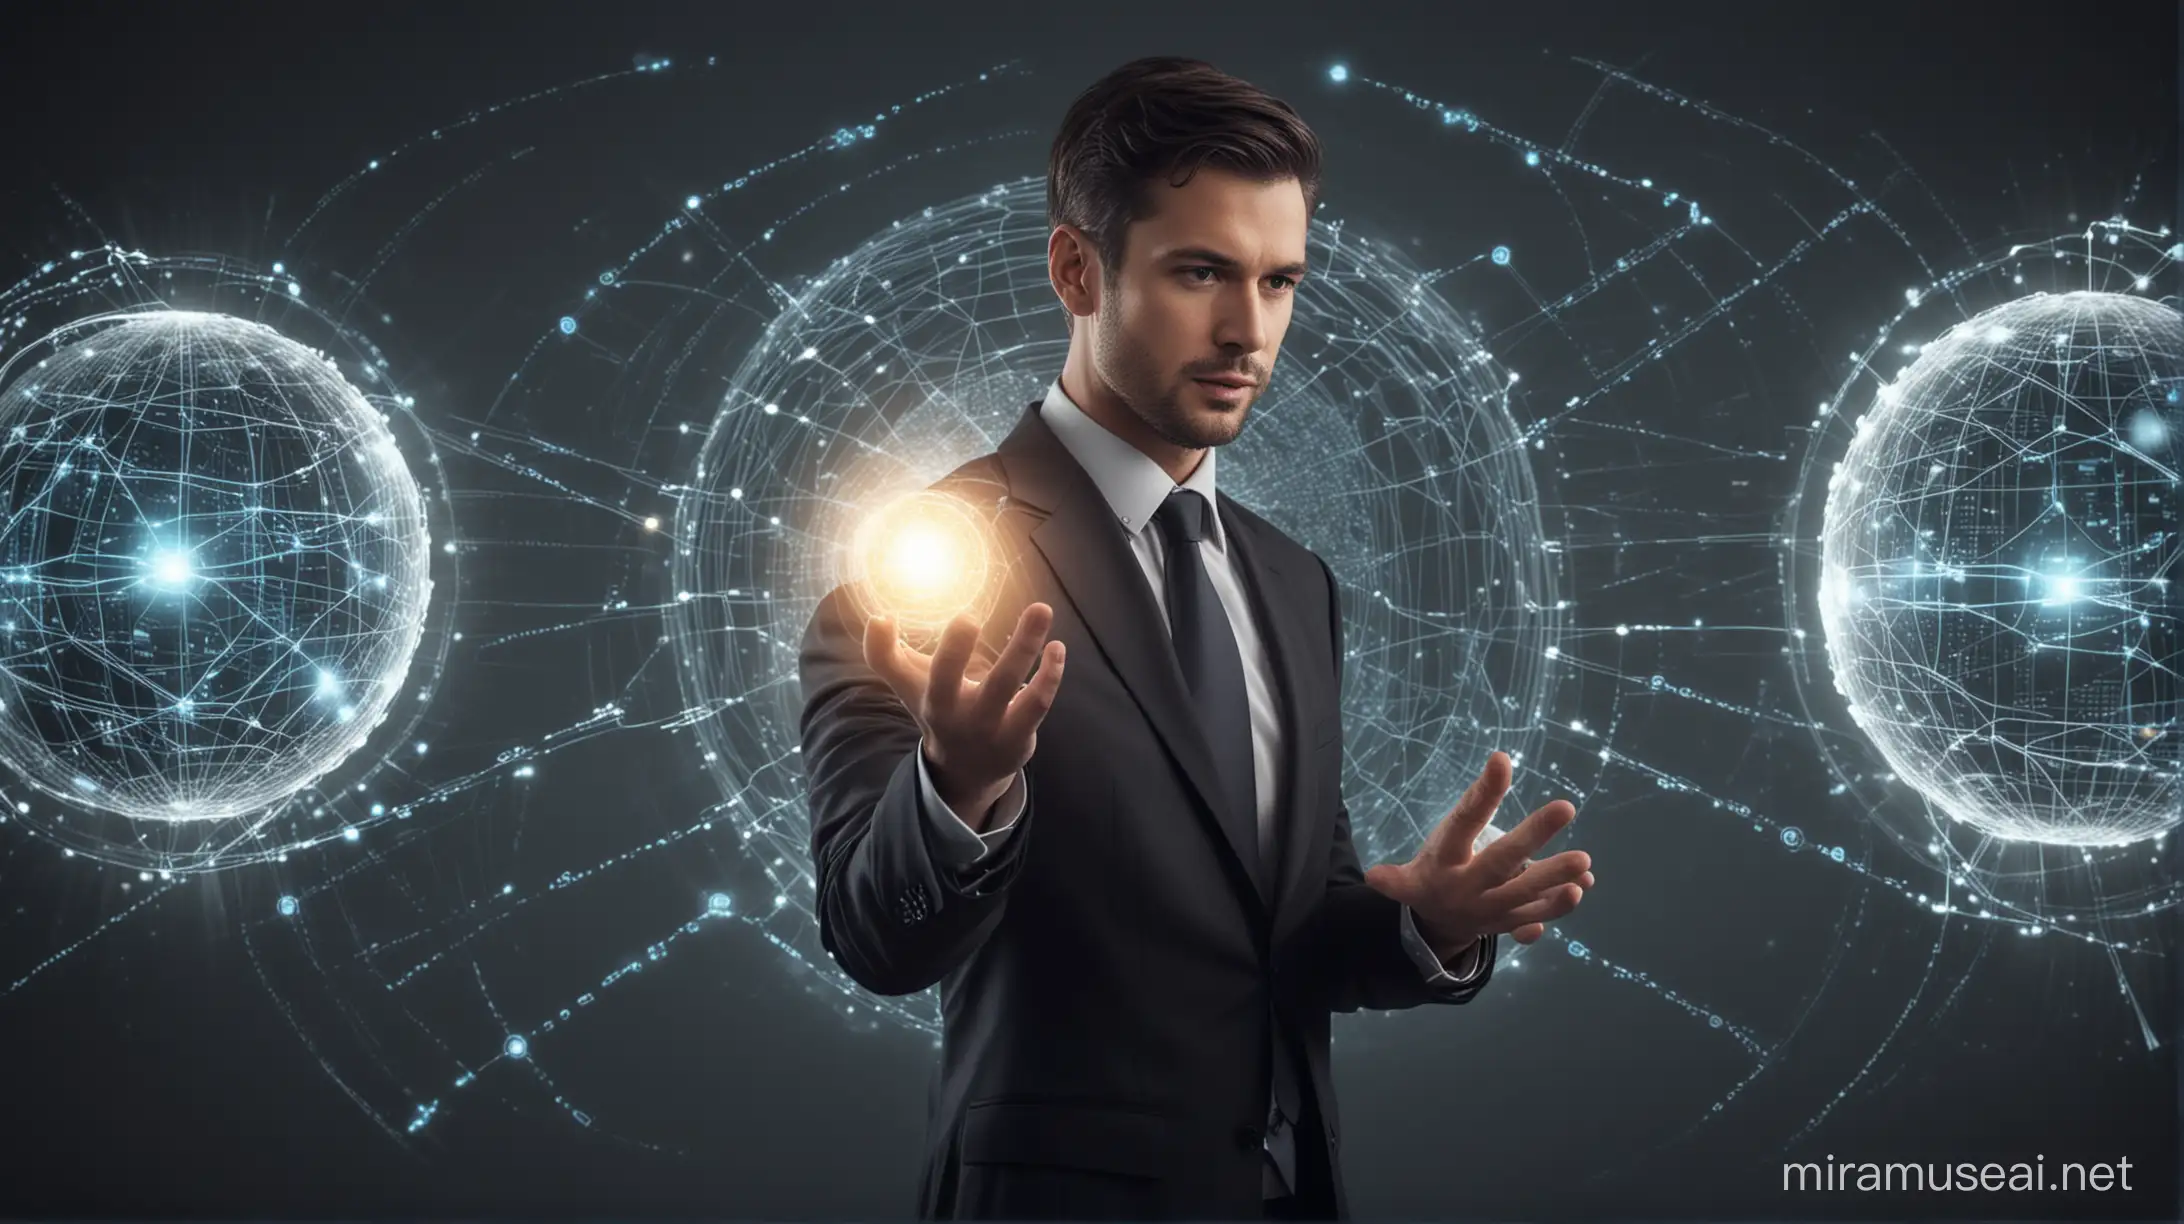 A businessman interacts with a glowing orb or network, representing the AI, with a user interface adapting and forming around them.